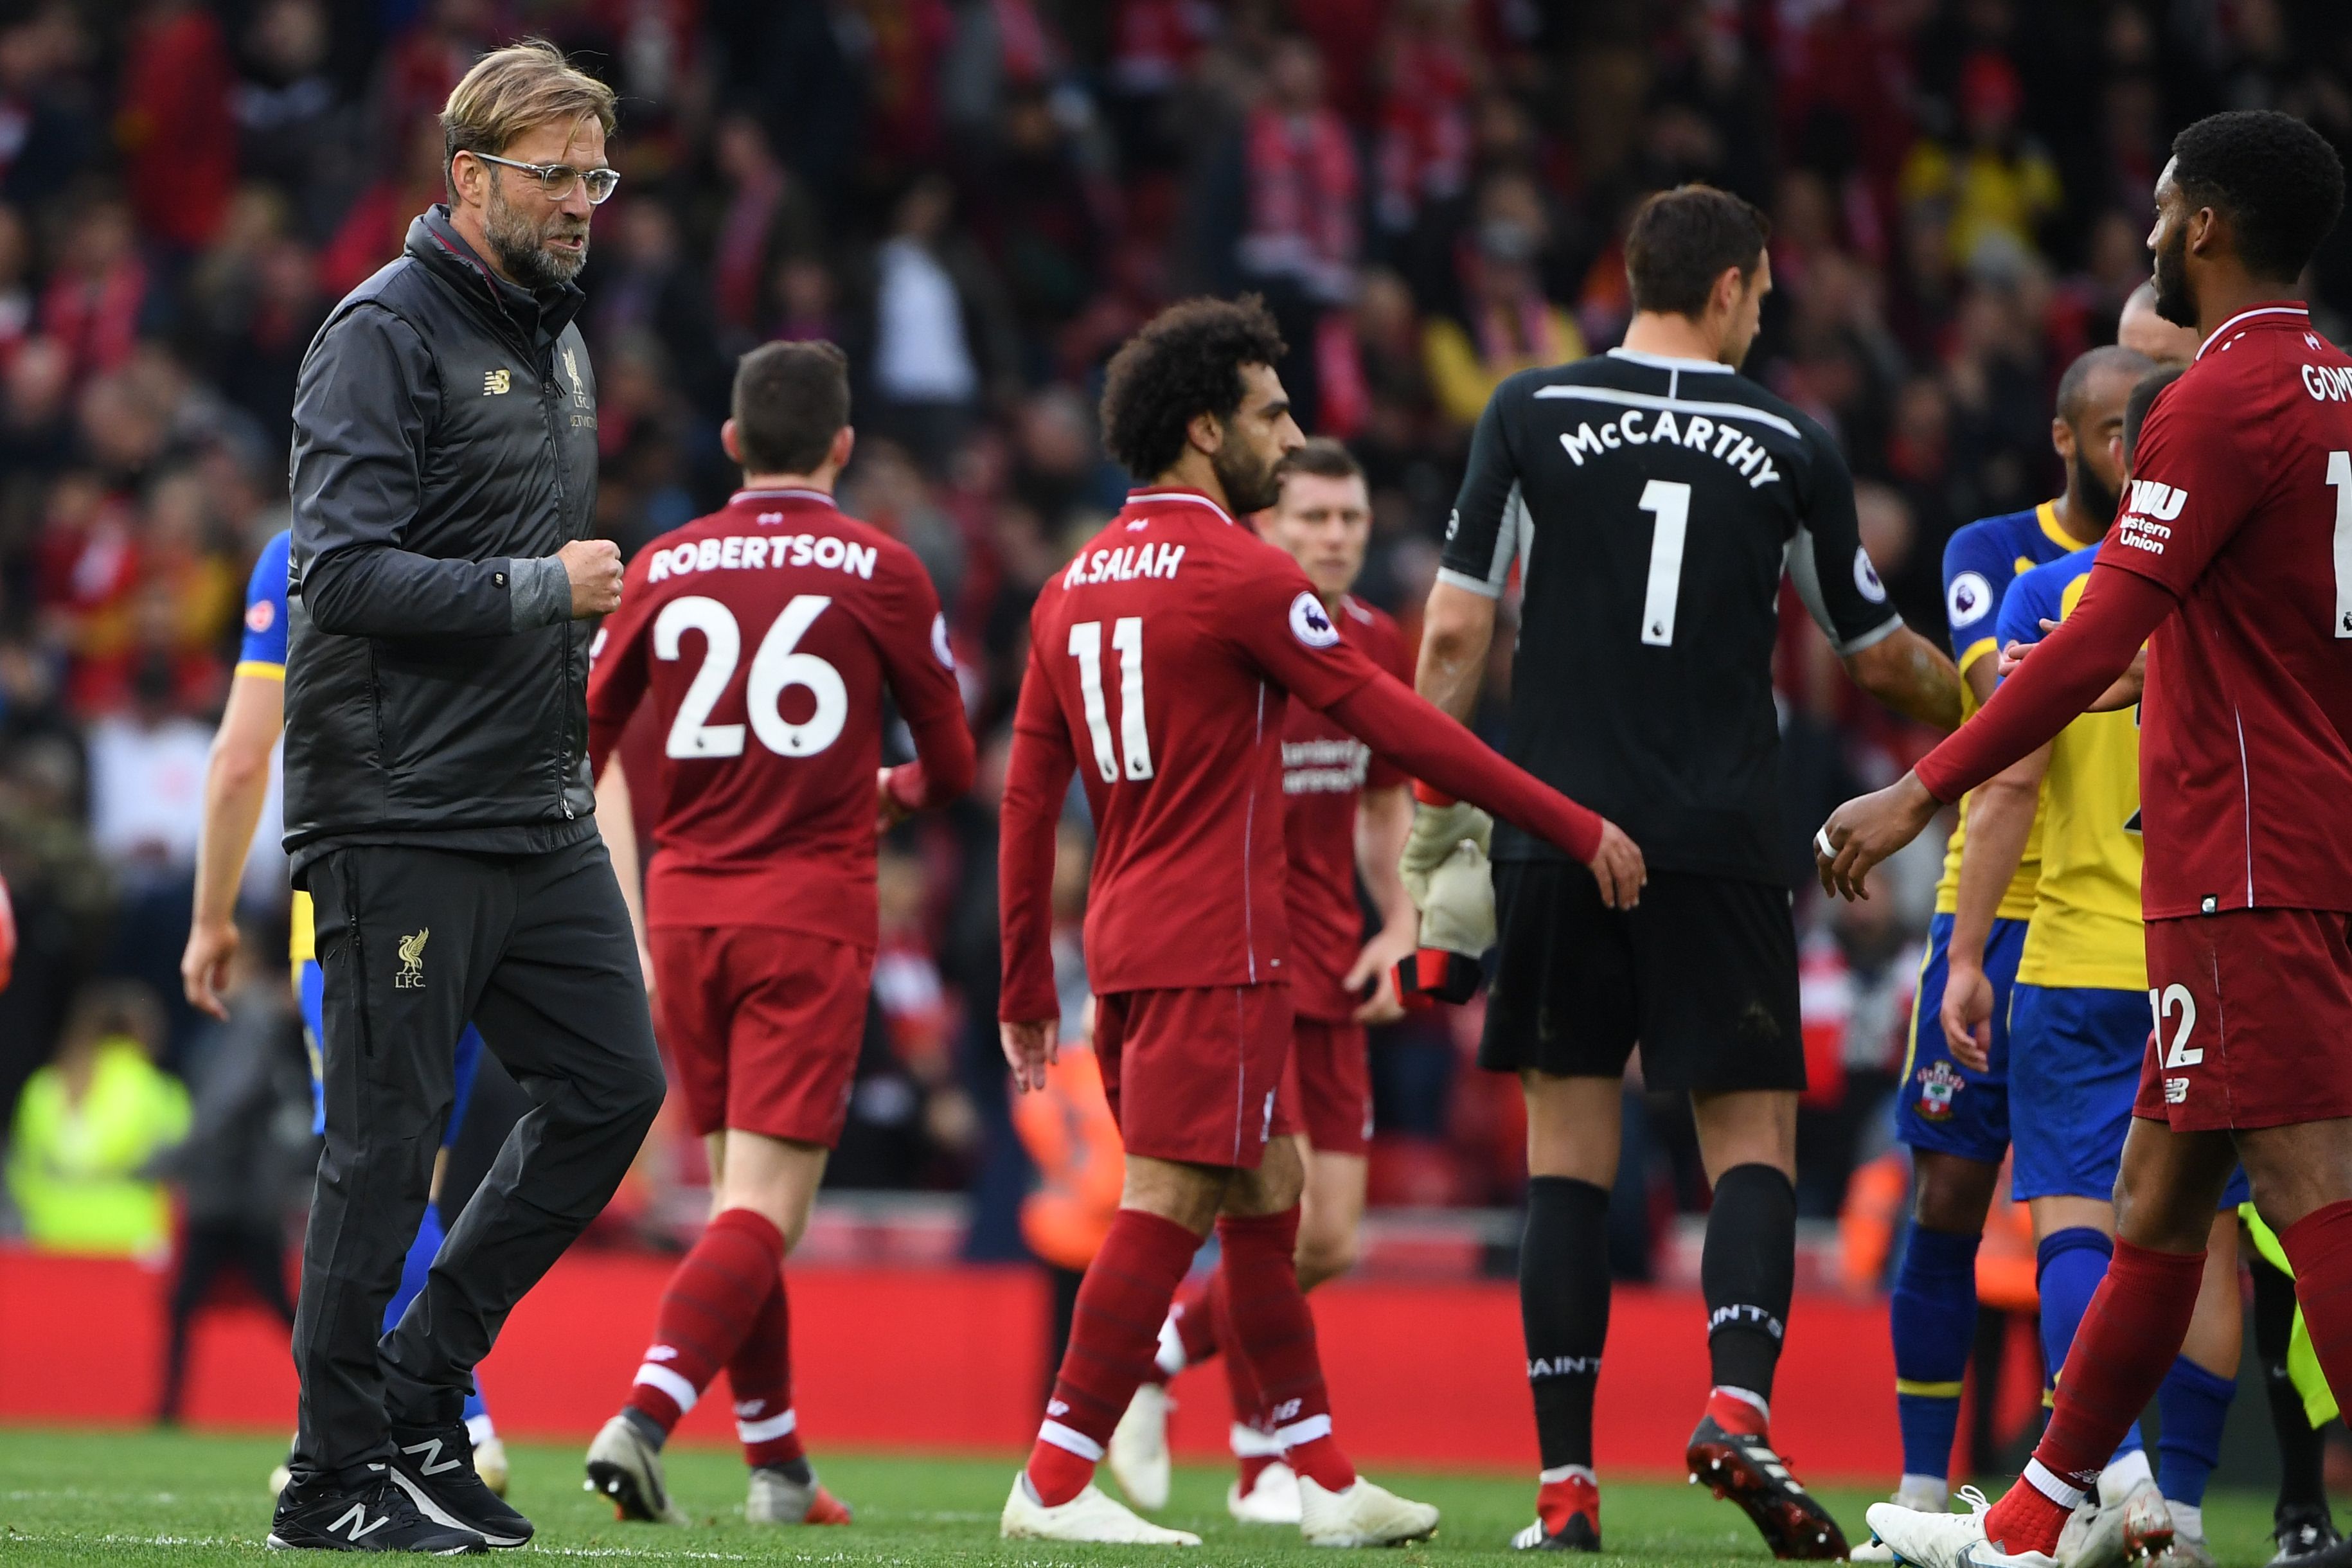 Liverpool's German manager Jurgen Klopp (L) gestures after the English Premier League football match between Liverpool and Southampton at Anfield in Liverpool, north west England on September 22, 2018. (Photo by Paul ELLIS / AFP) / RESTRICTED TO EDITORIAL USE. No use with unauthorized audio, video, data, fixture lists, club/league logos or 'live' services. Online in-match use limited to 120 images. An additional 40 images may be used in extra time. No video emulation. Social media in-match use limited to 120 images. An additional 40 images may be used in extra time. No use in betting publications, games or single club/league/player publications. /         (Photo credit should read PAUL ELLIS/AFP/Getty Images)